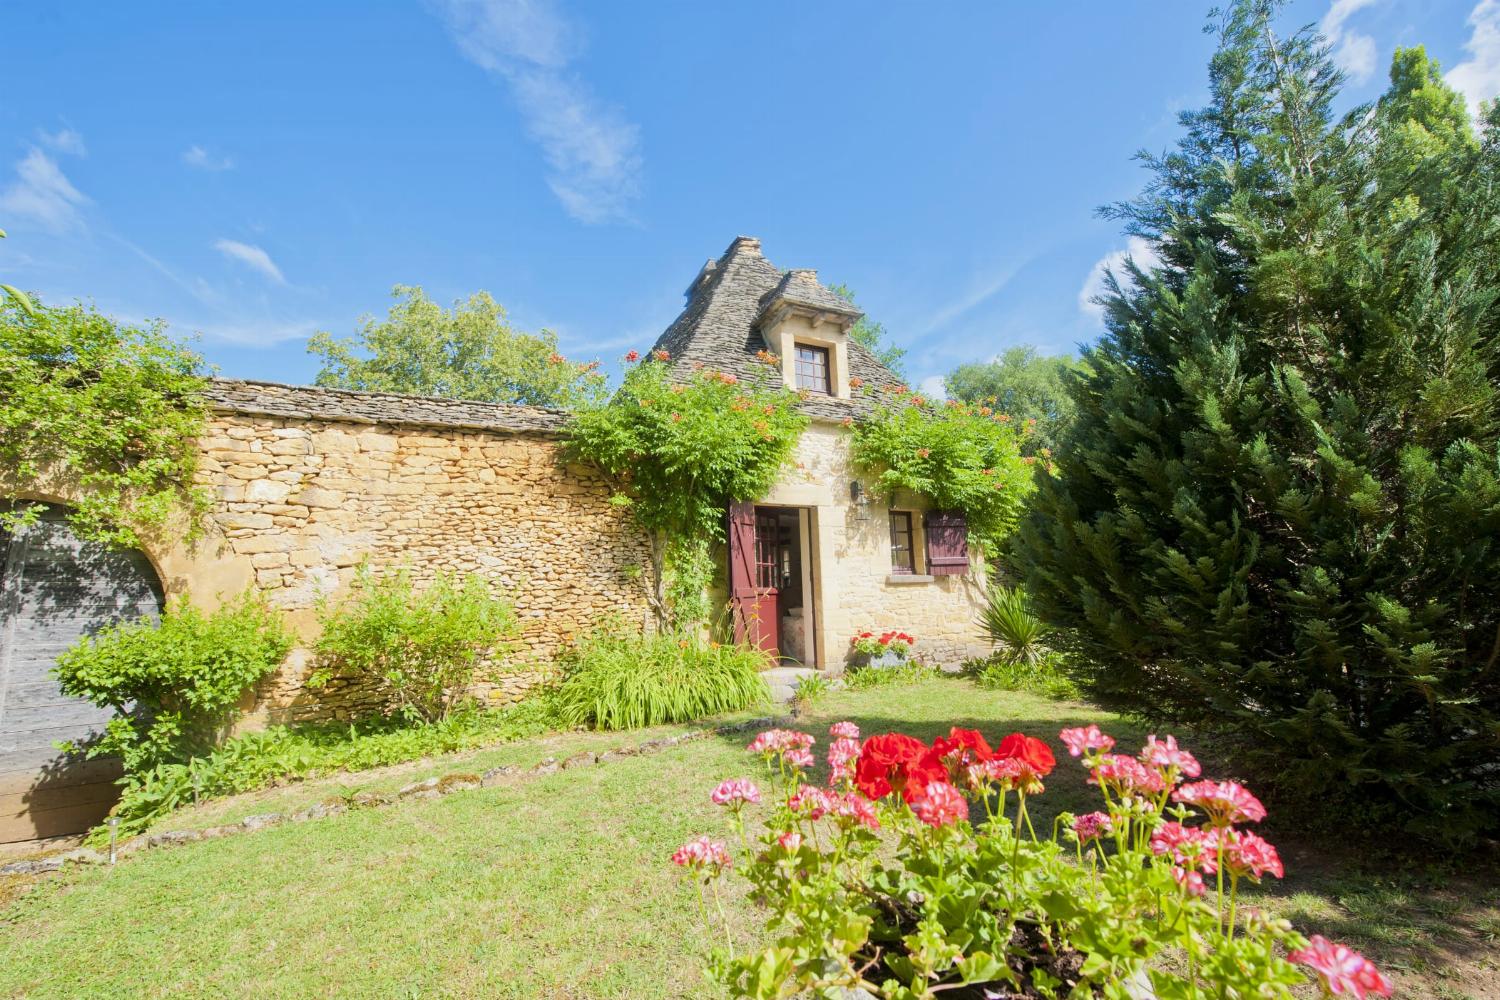 Rental cottage in Nouvelle-Aquitaine